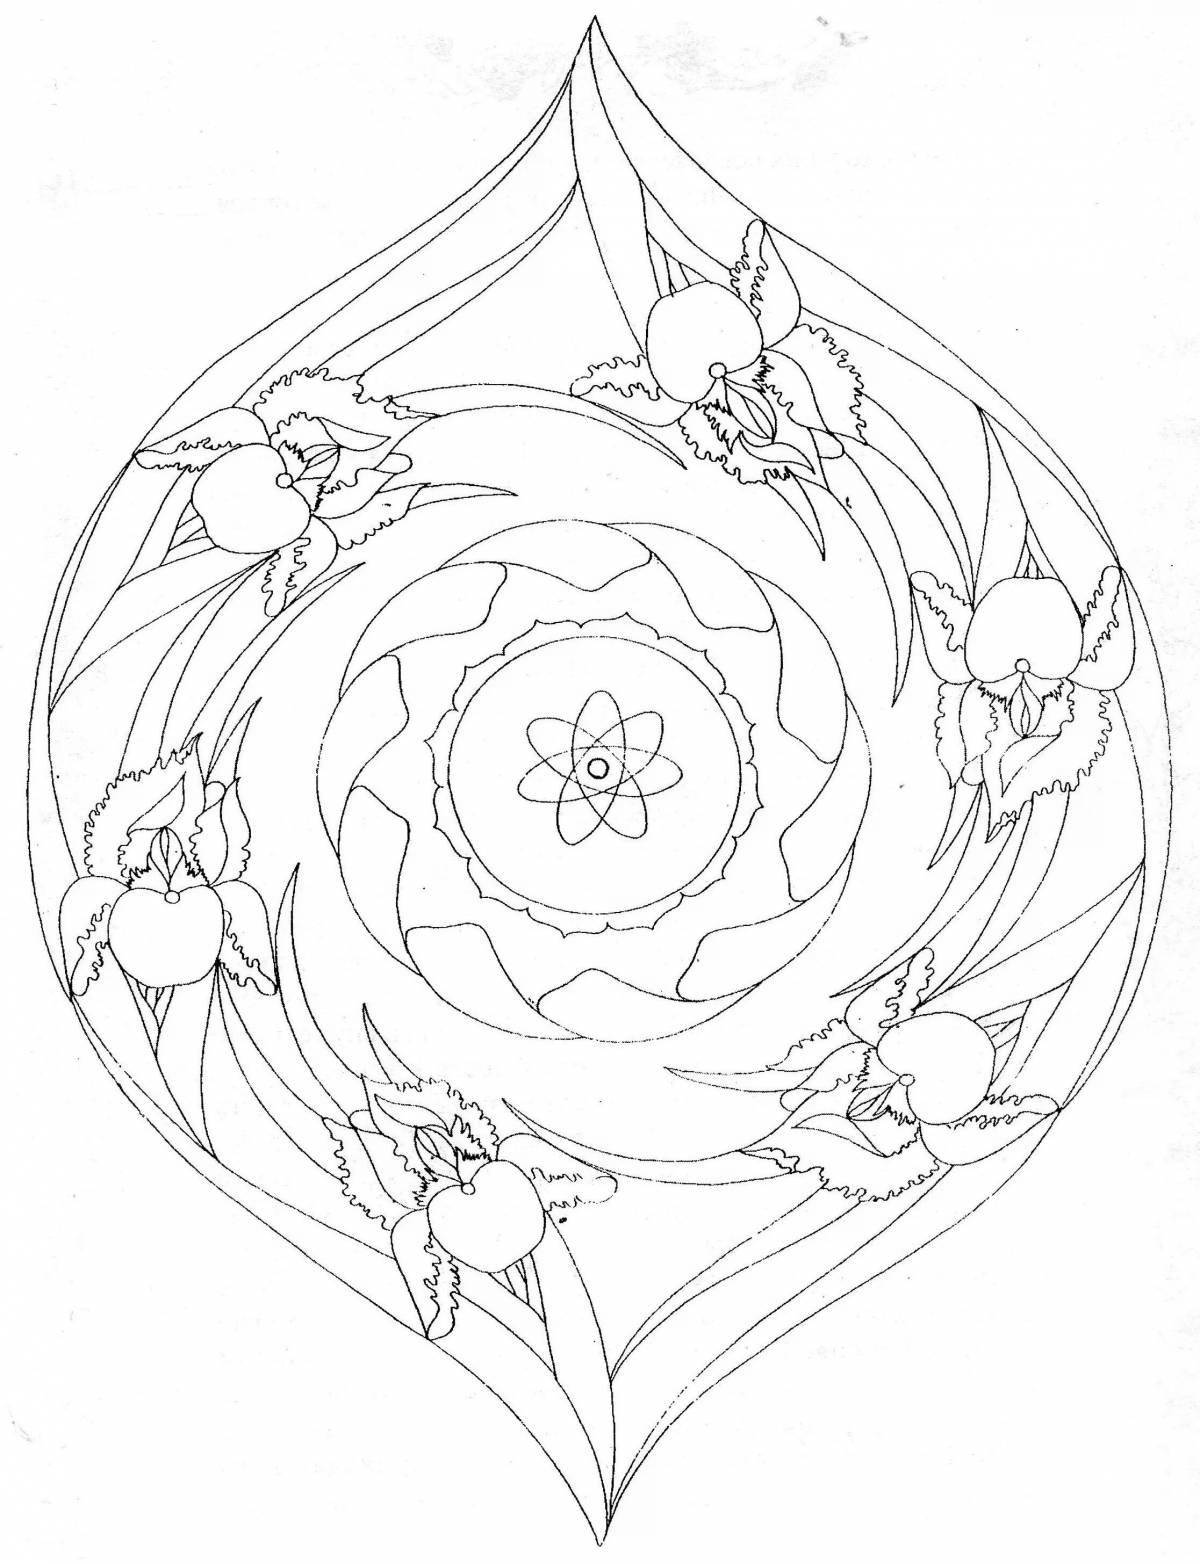 Coloring page charming tyurina